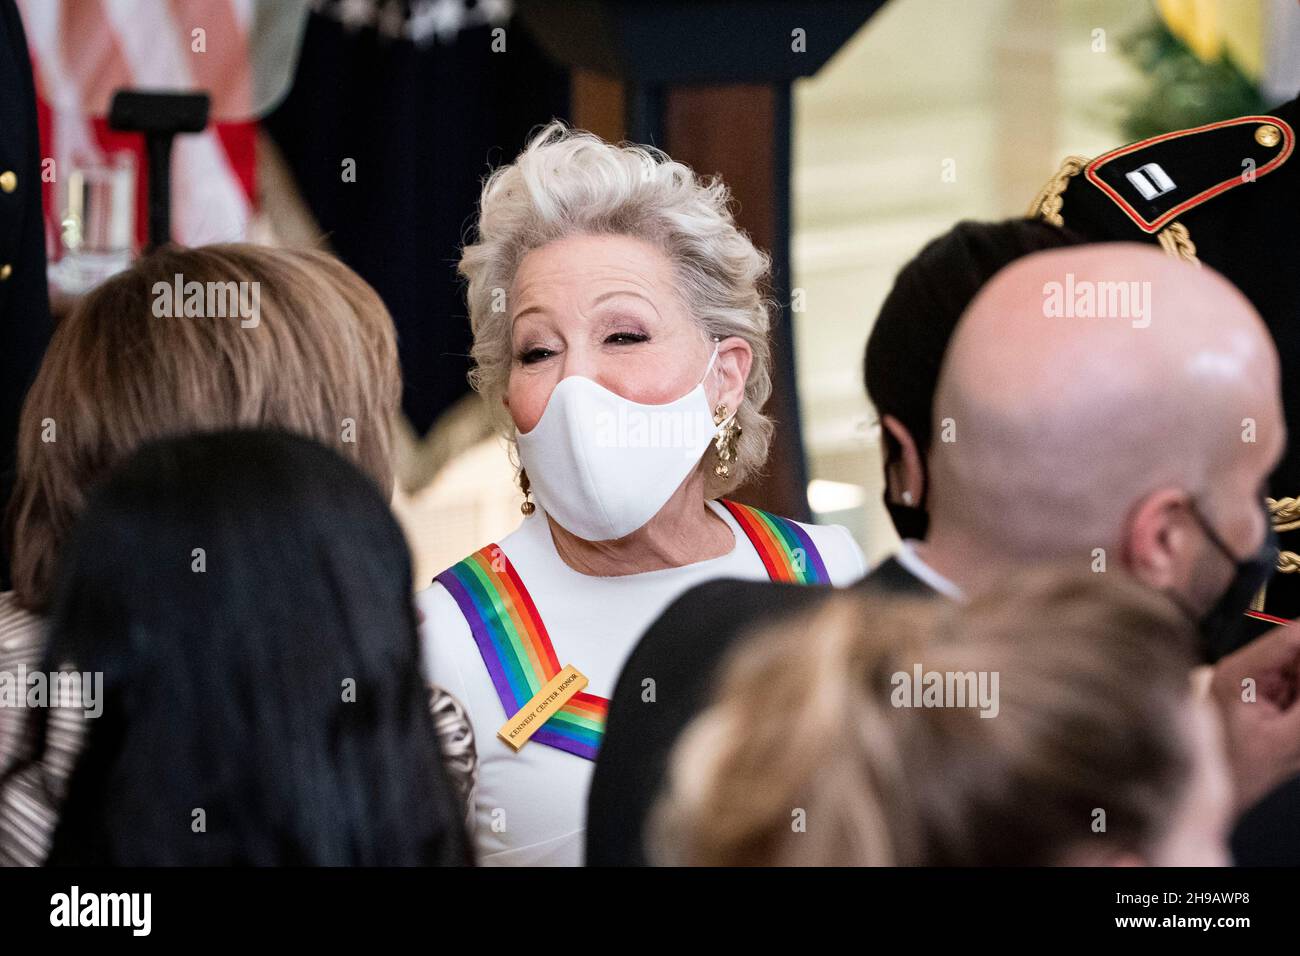 Washington, DC, U.S., on Sunday, Dec. 5, 2021. Actress Bette Midler departs during the Kennedy Center Honorees Reception in the East Room of the White House in Washington, DC, U.S., on Sunday, Dec. 5, 2021. The John F. Kennedy Center for the Performing Arts 44th Honorees for lifetime artistic achievements include operatic bass-baritone Justino Diaz, Motown founder Berry Gordy, Saturday Night Live creator Lorne Michaels, actress Bette Midler, and singer-songwriter Joni Mitchell. Credit: Al Drago/Pool via CNP /MediaPunch Stock Photo